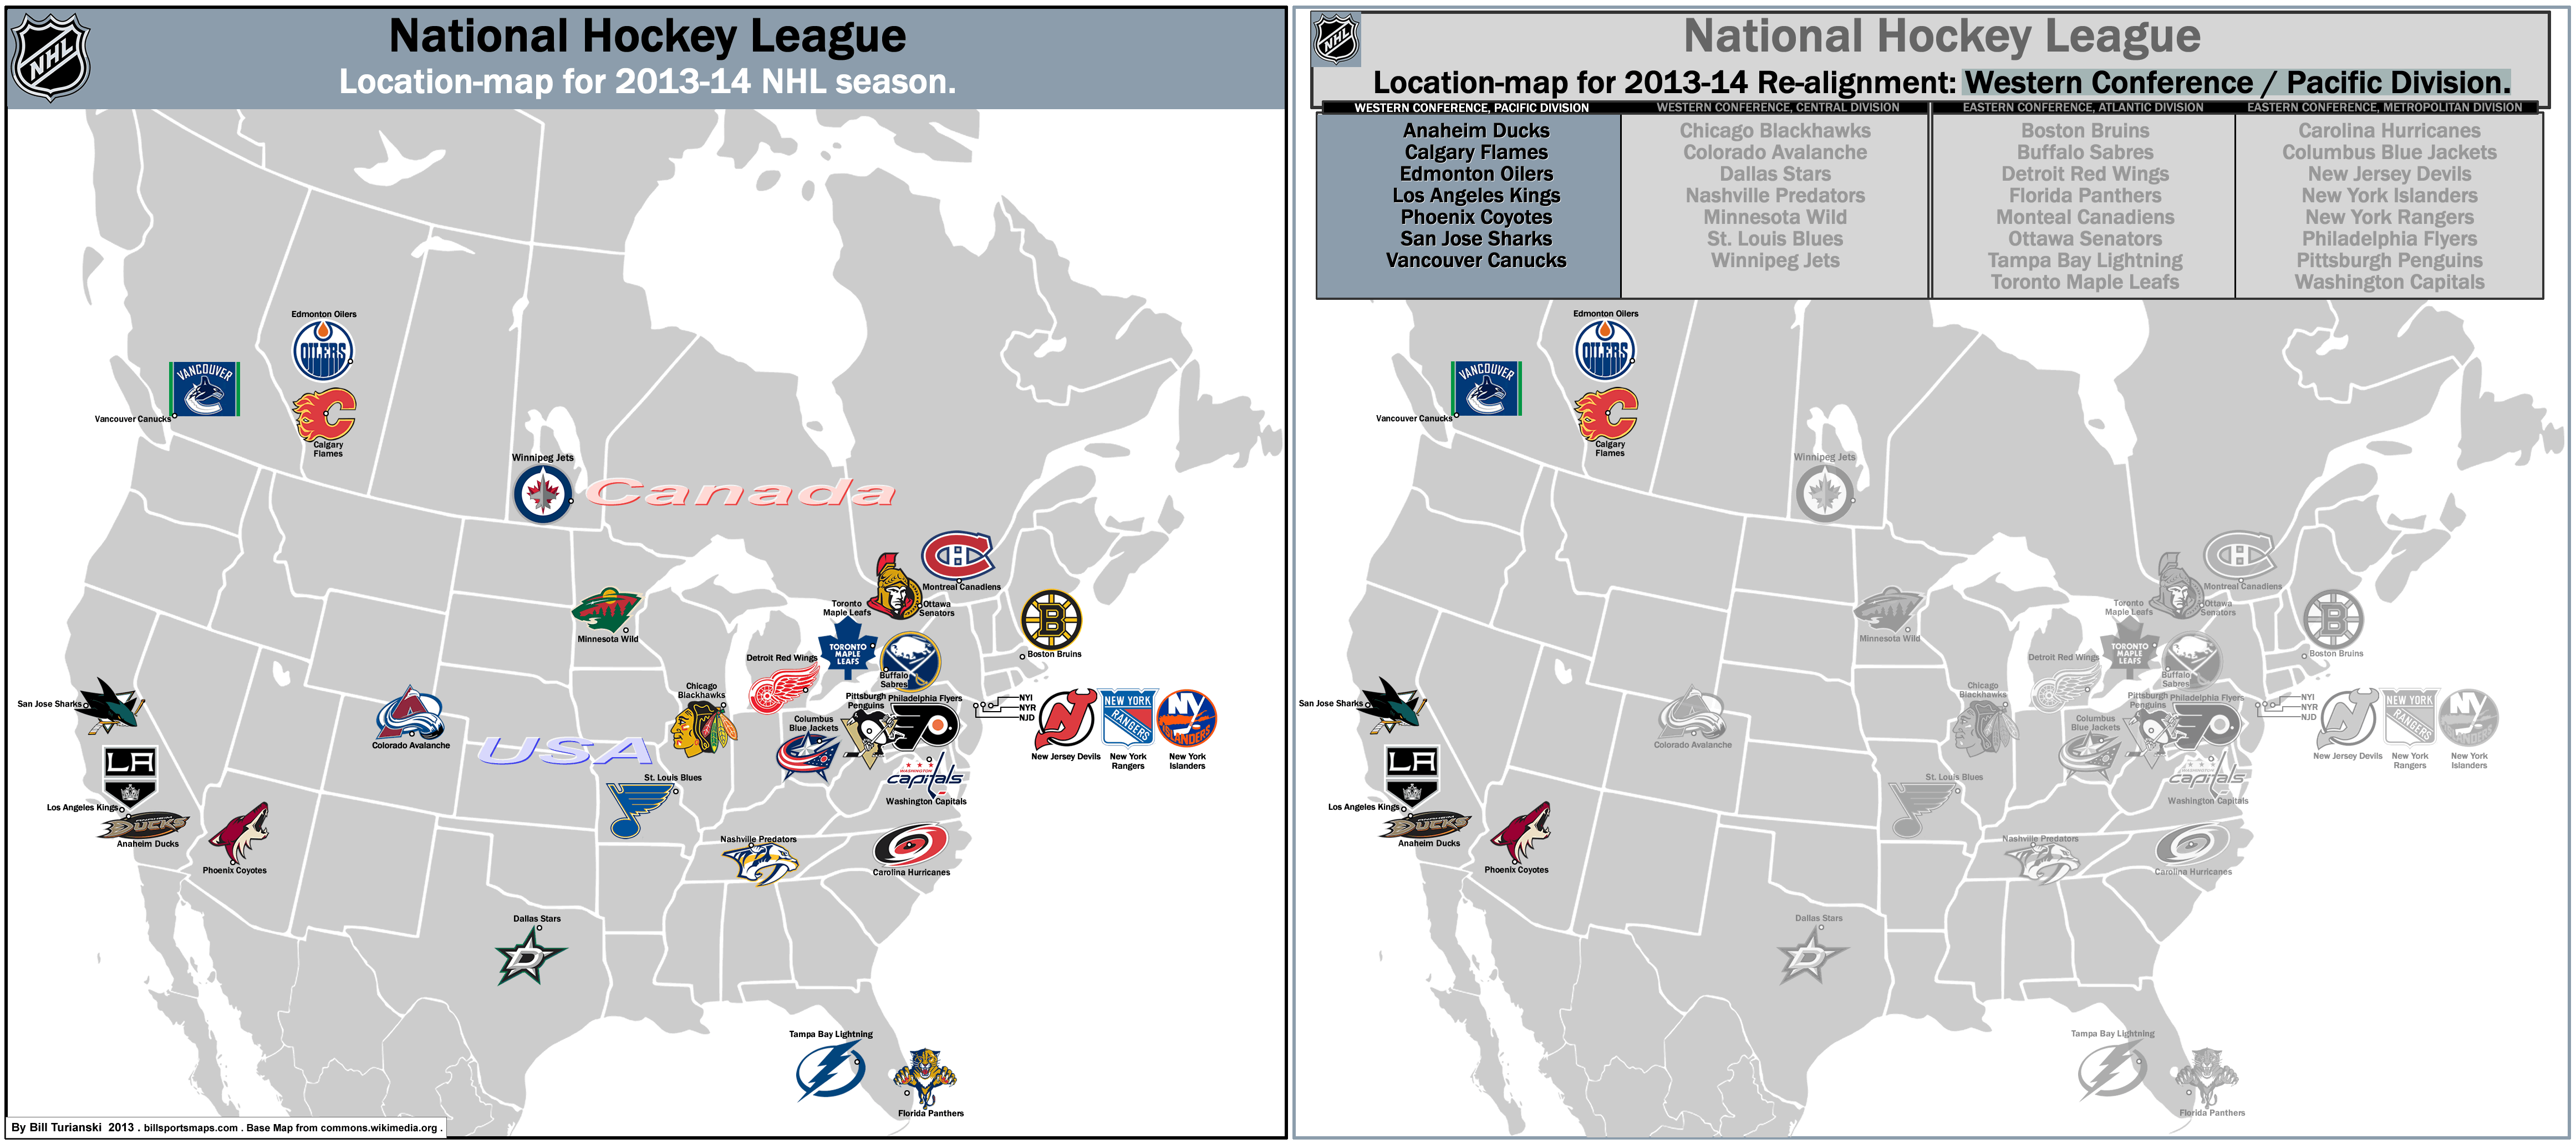 NHL 2013-14: Realignment Location-maps, with the 4 new divisions shown  (Western Conference/Pacific Division, Western Conference/Central Division;  Eastern Conference/Atlantic Division, Eastern Conference/Metropolitan  Division). «